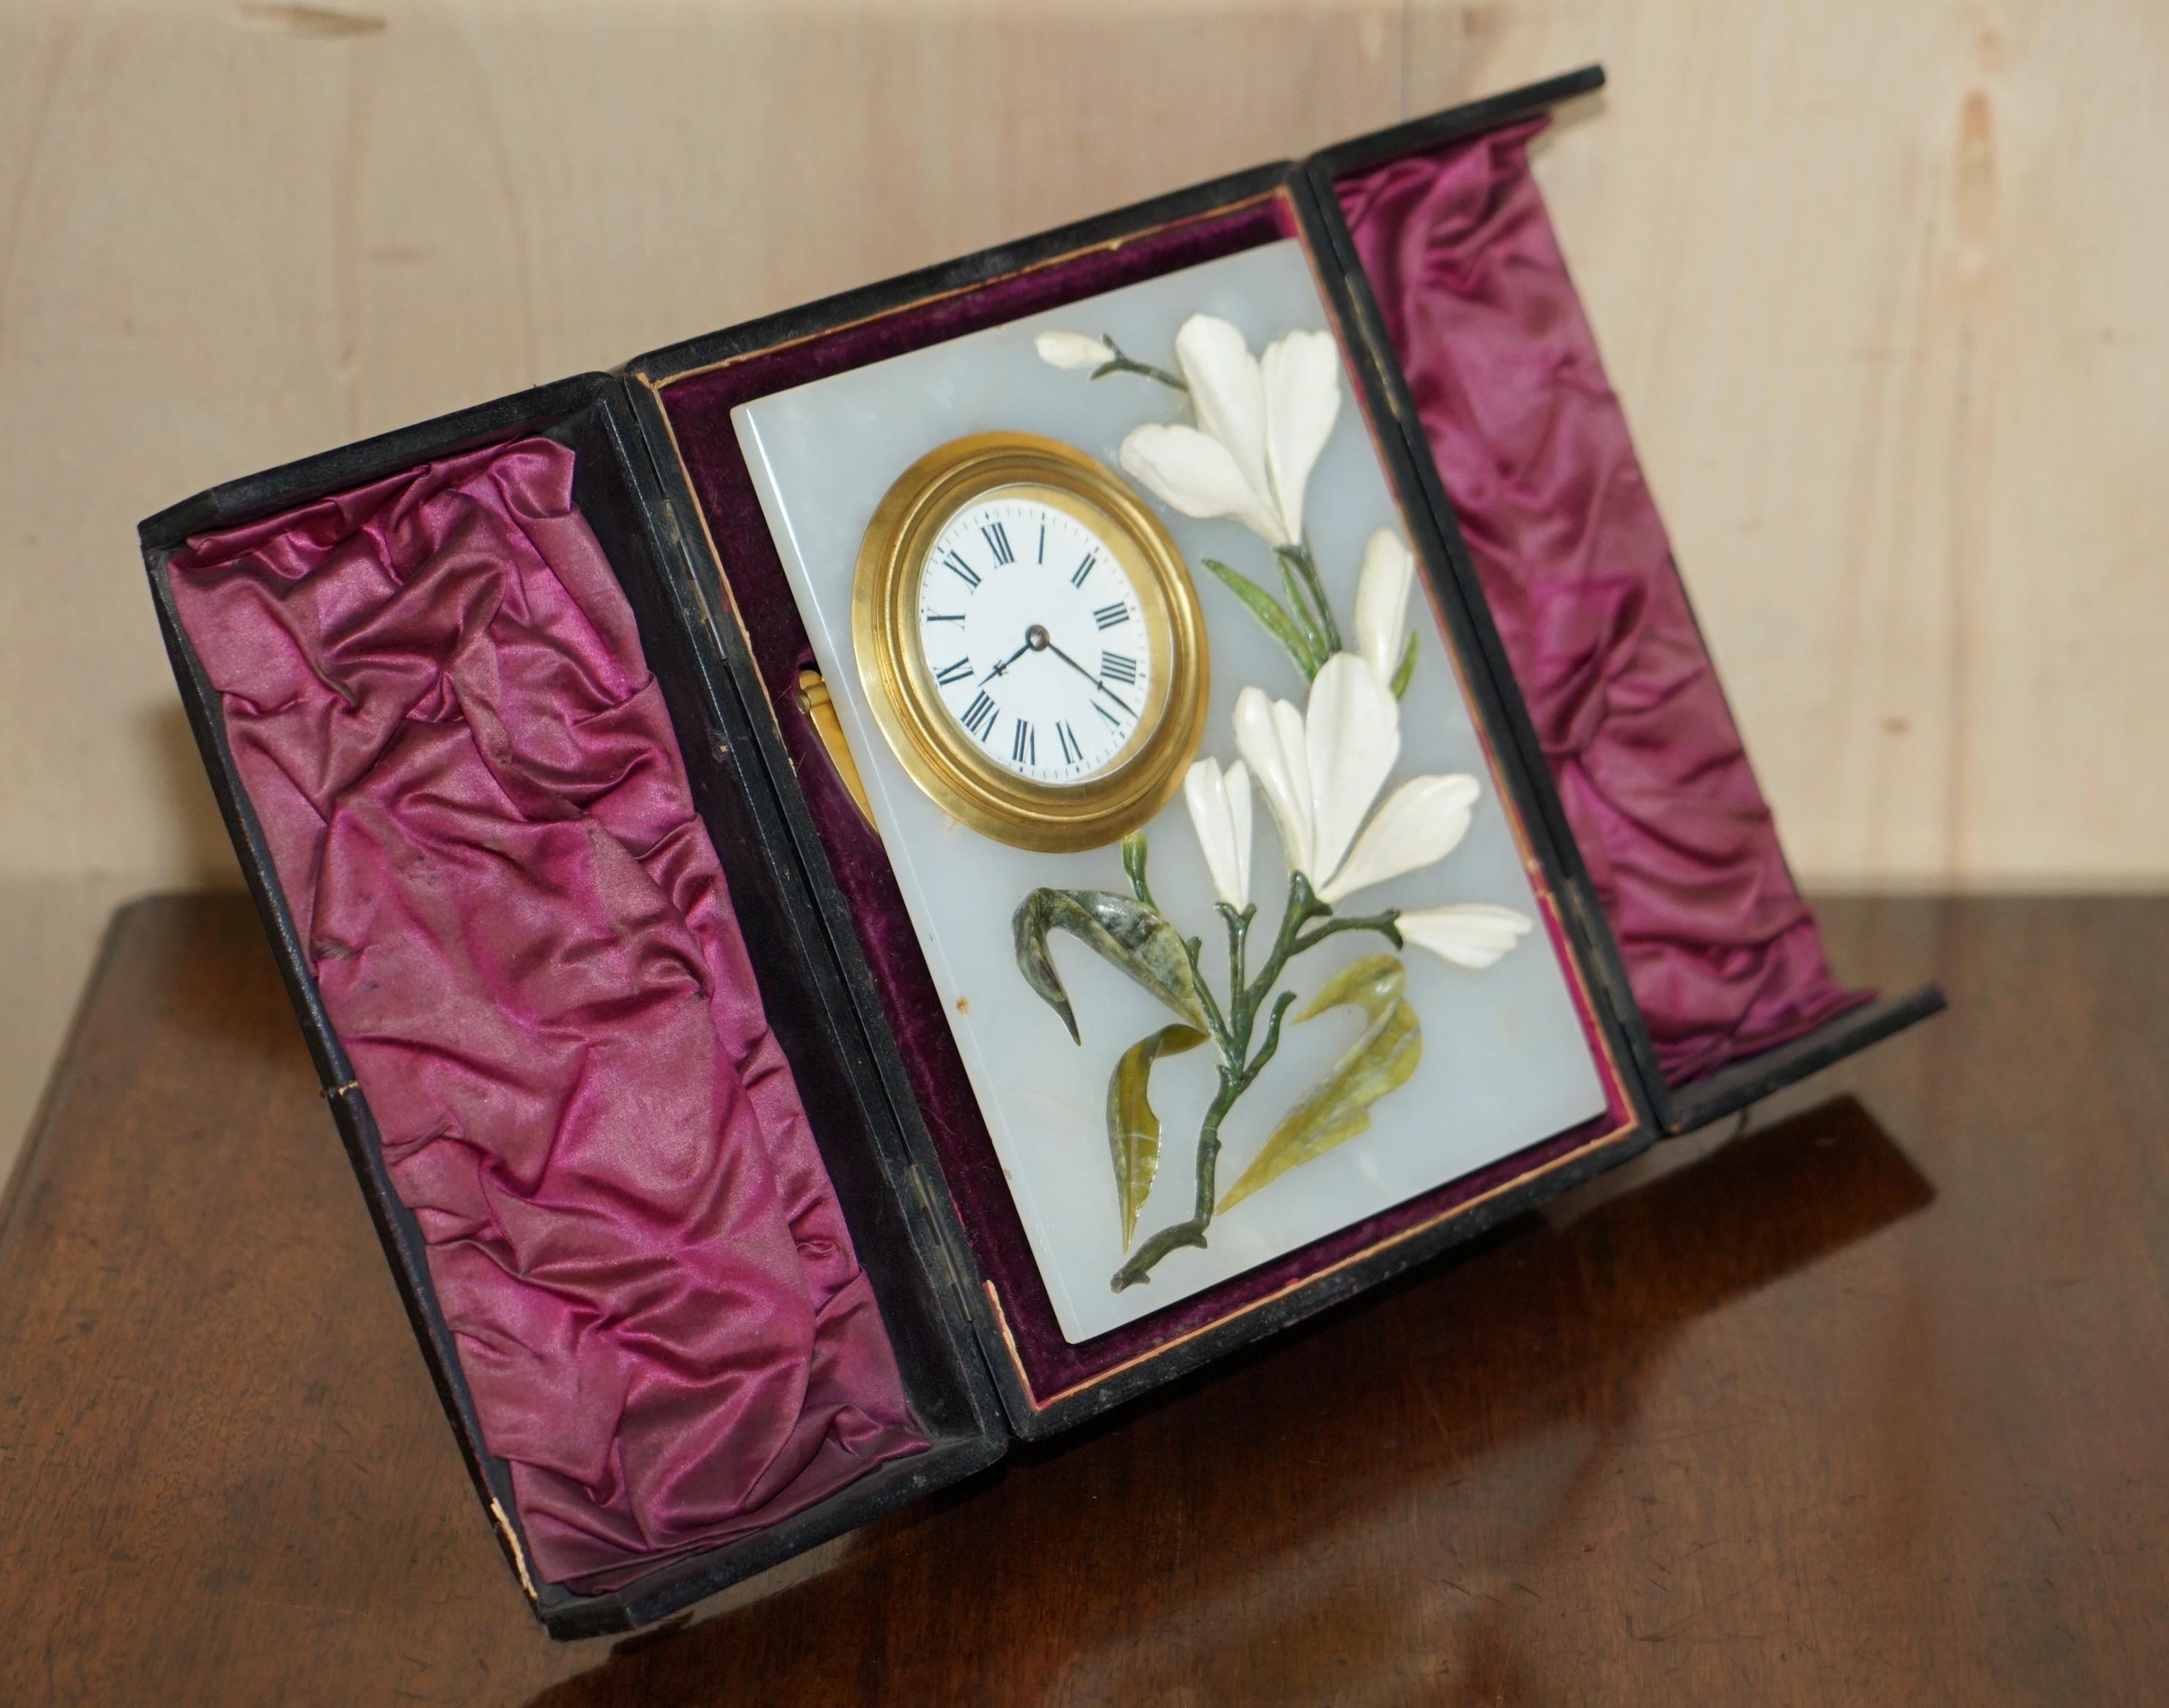 We are delighted to offer for sale this lovely original John D Harris Marble & Pietra Dura Boudoir clock in the original case.

A very fine time piece, kept in its original case for what looks like its entire life, there doesn’t seem to be any